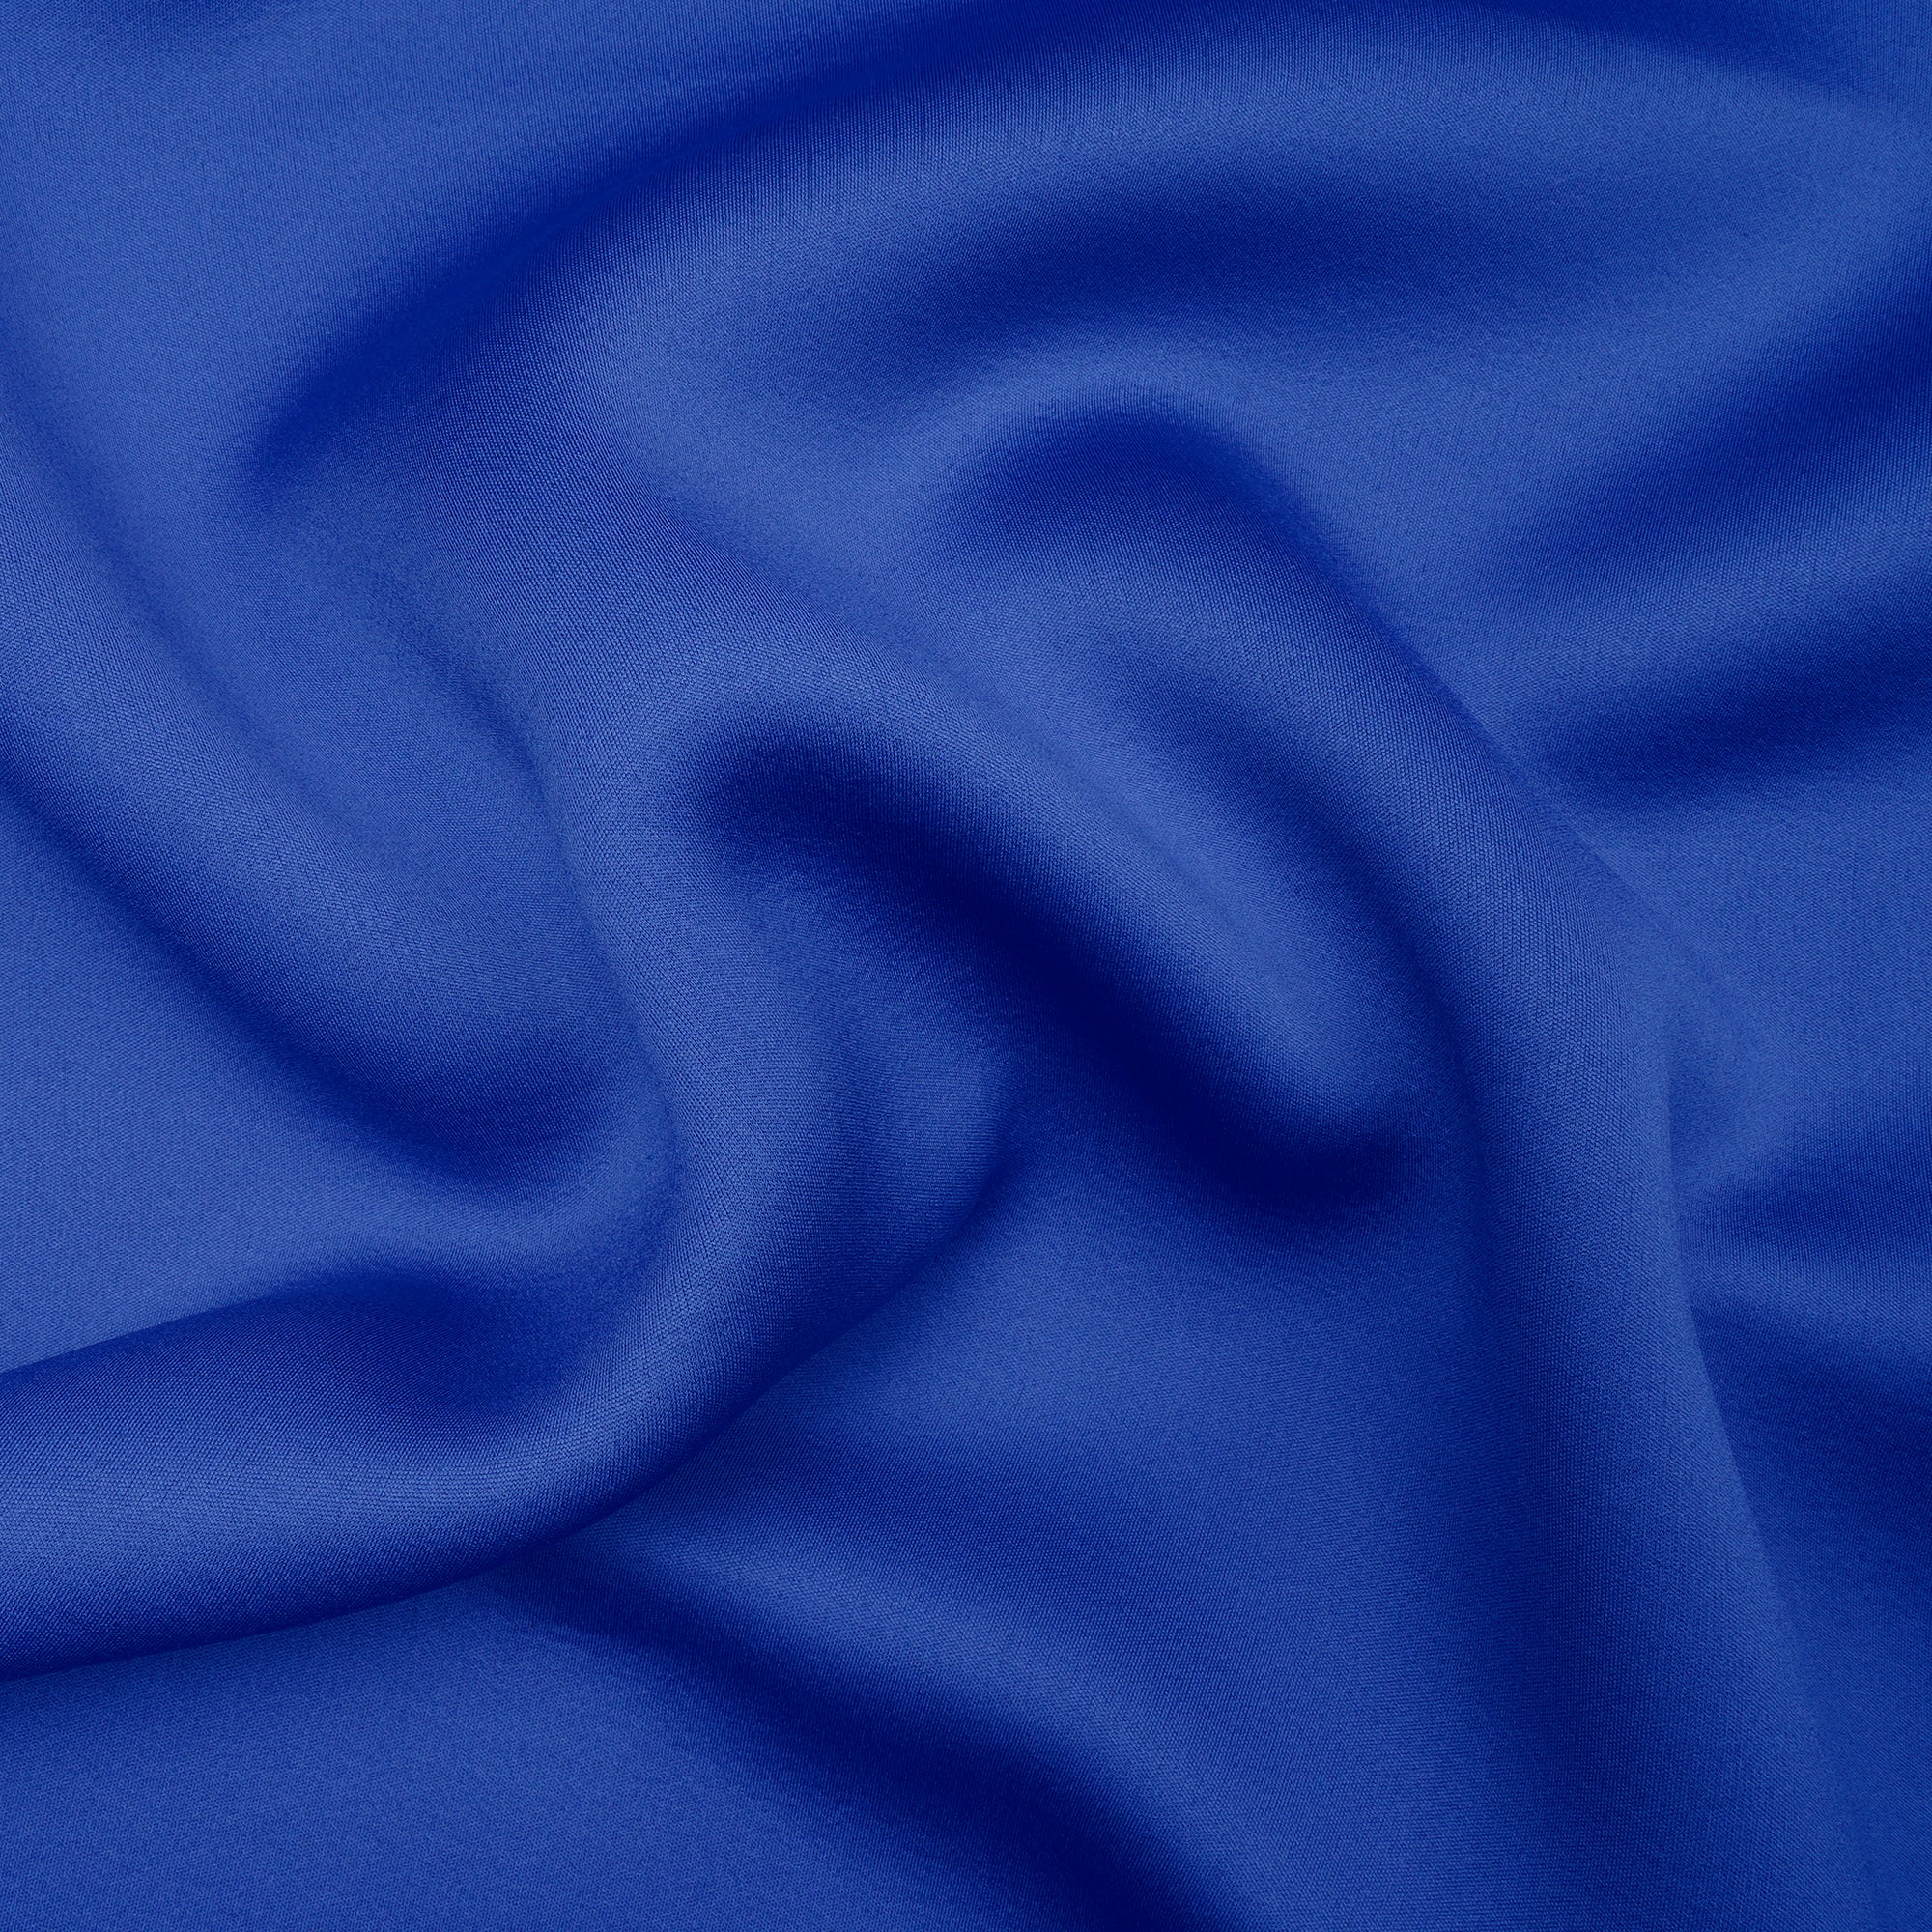 Indigo Bunting Solid Dyed Imported Neoprene Fabric (60" Width)